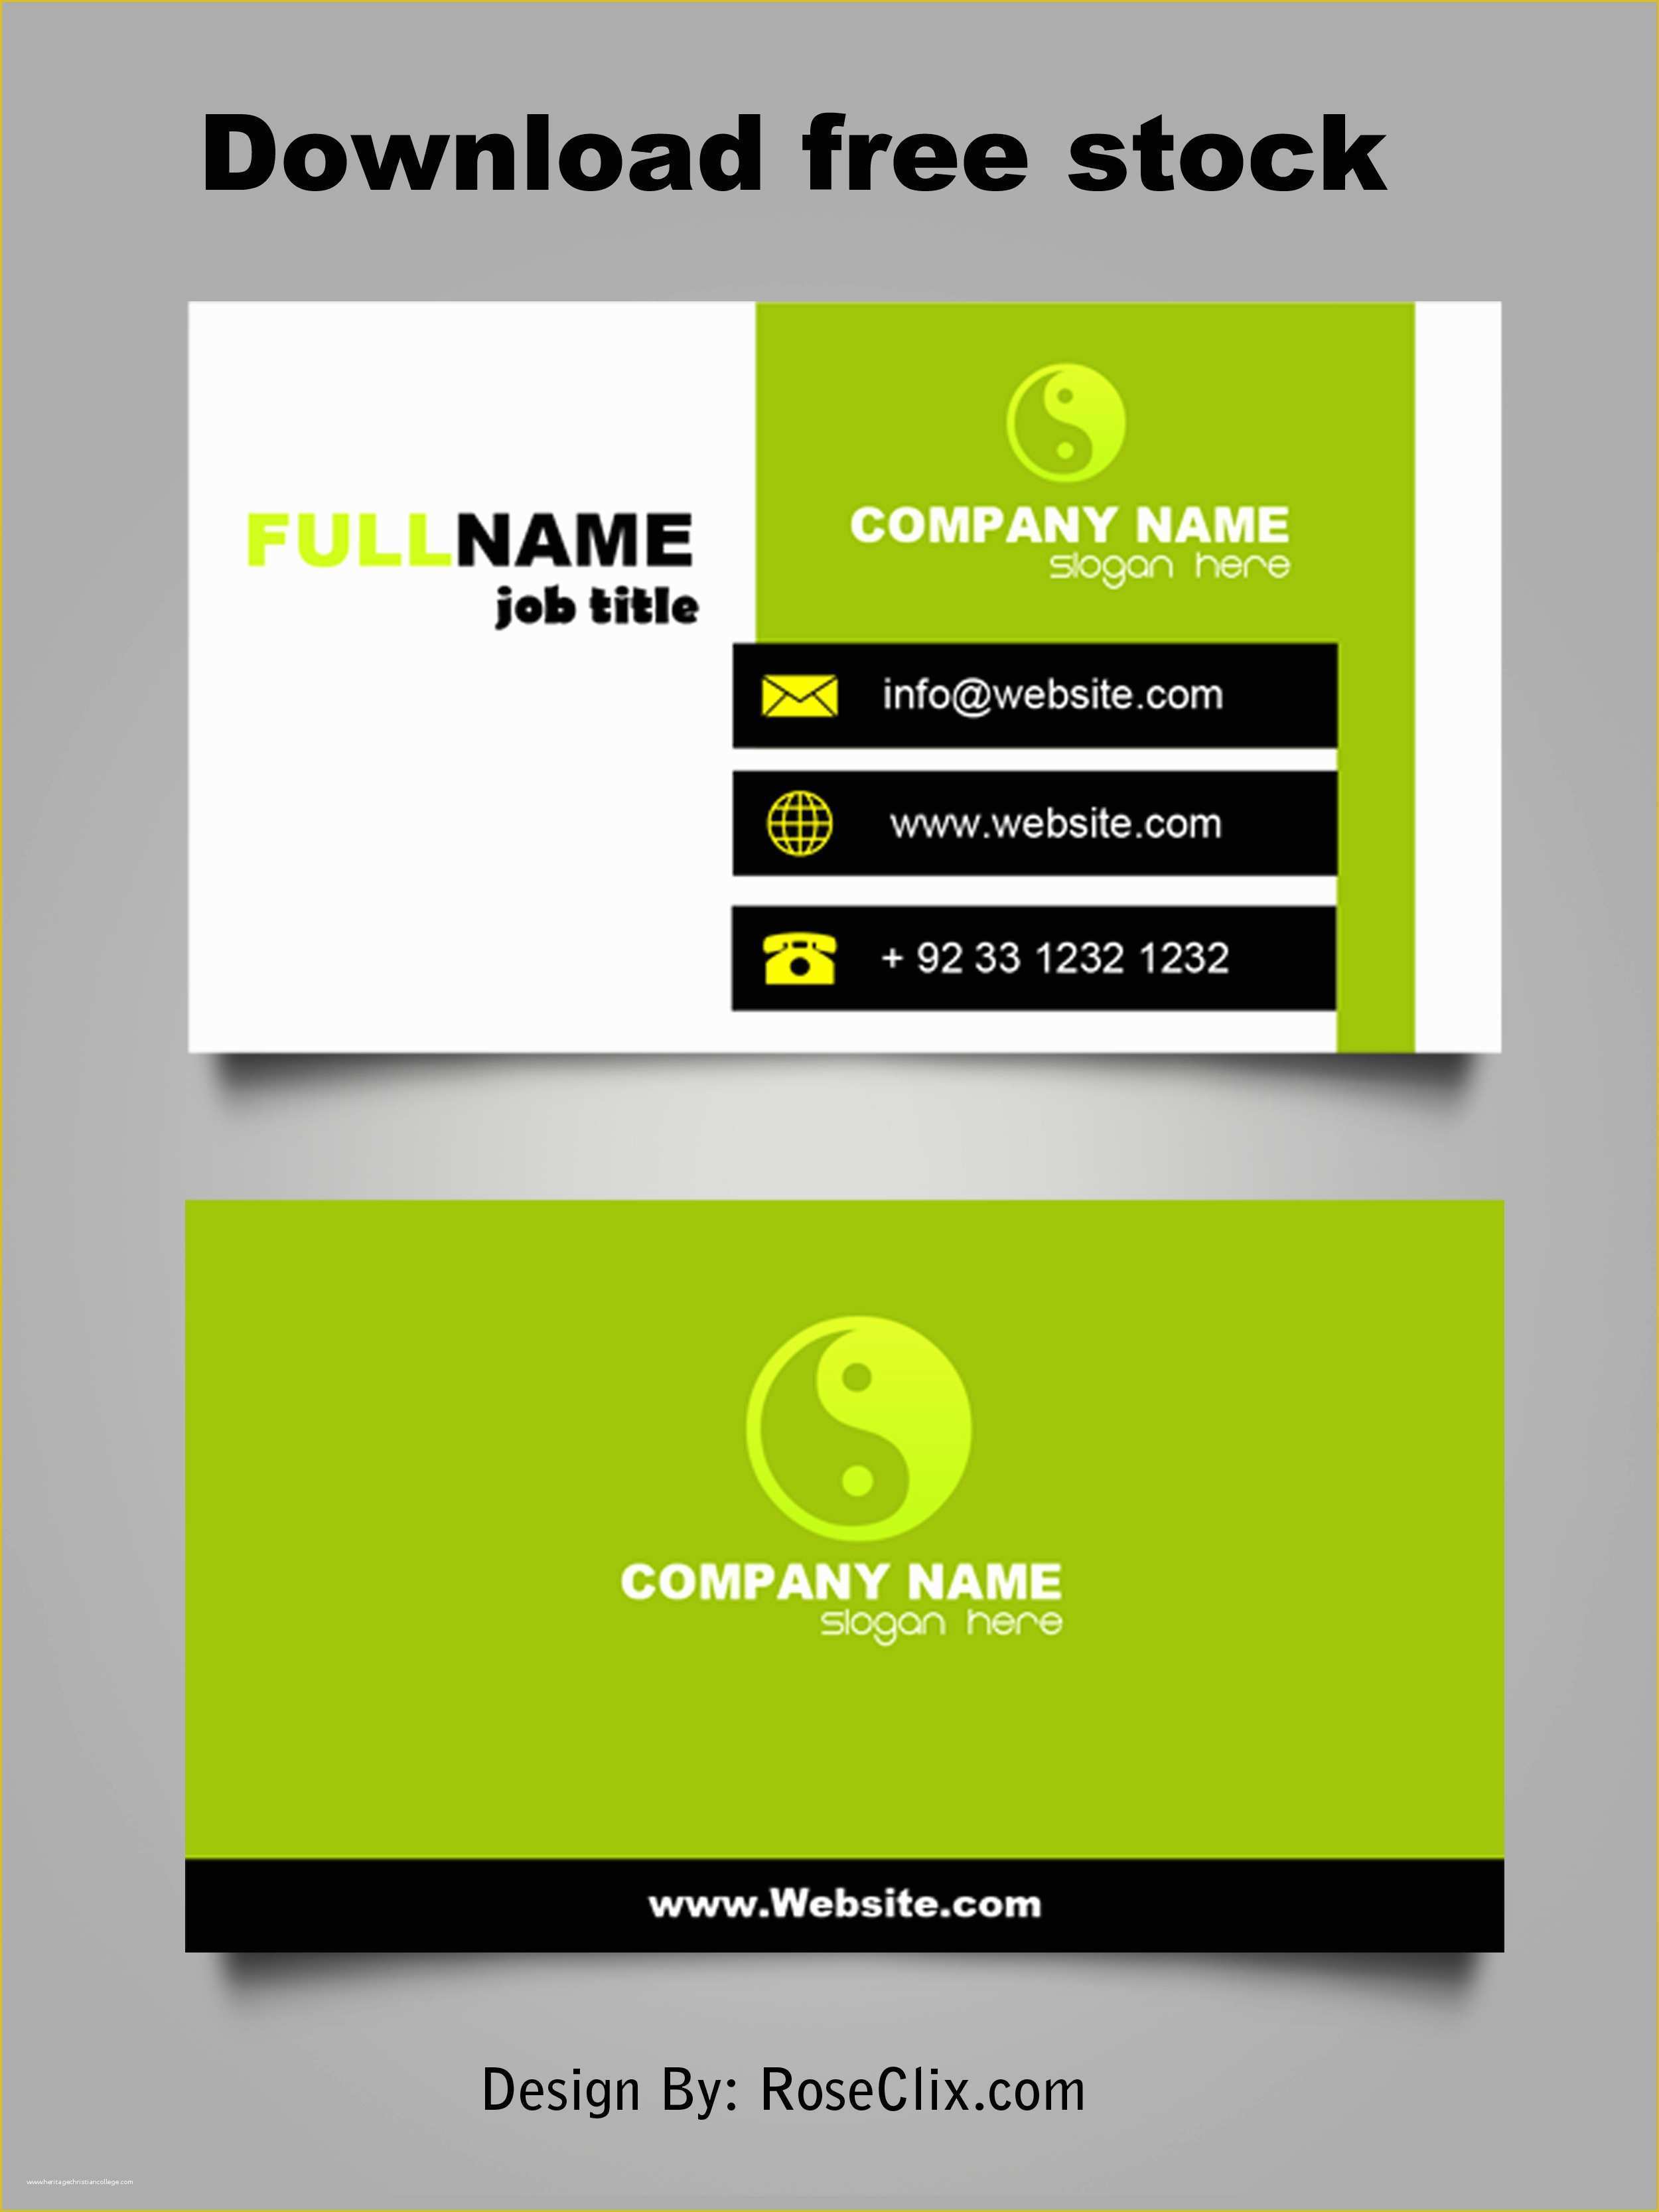 Business Card Website Template Free Of Rc Free Stocks My Namefb Cover Web Design